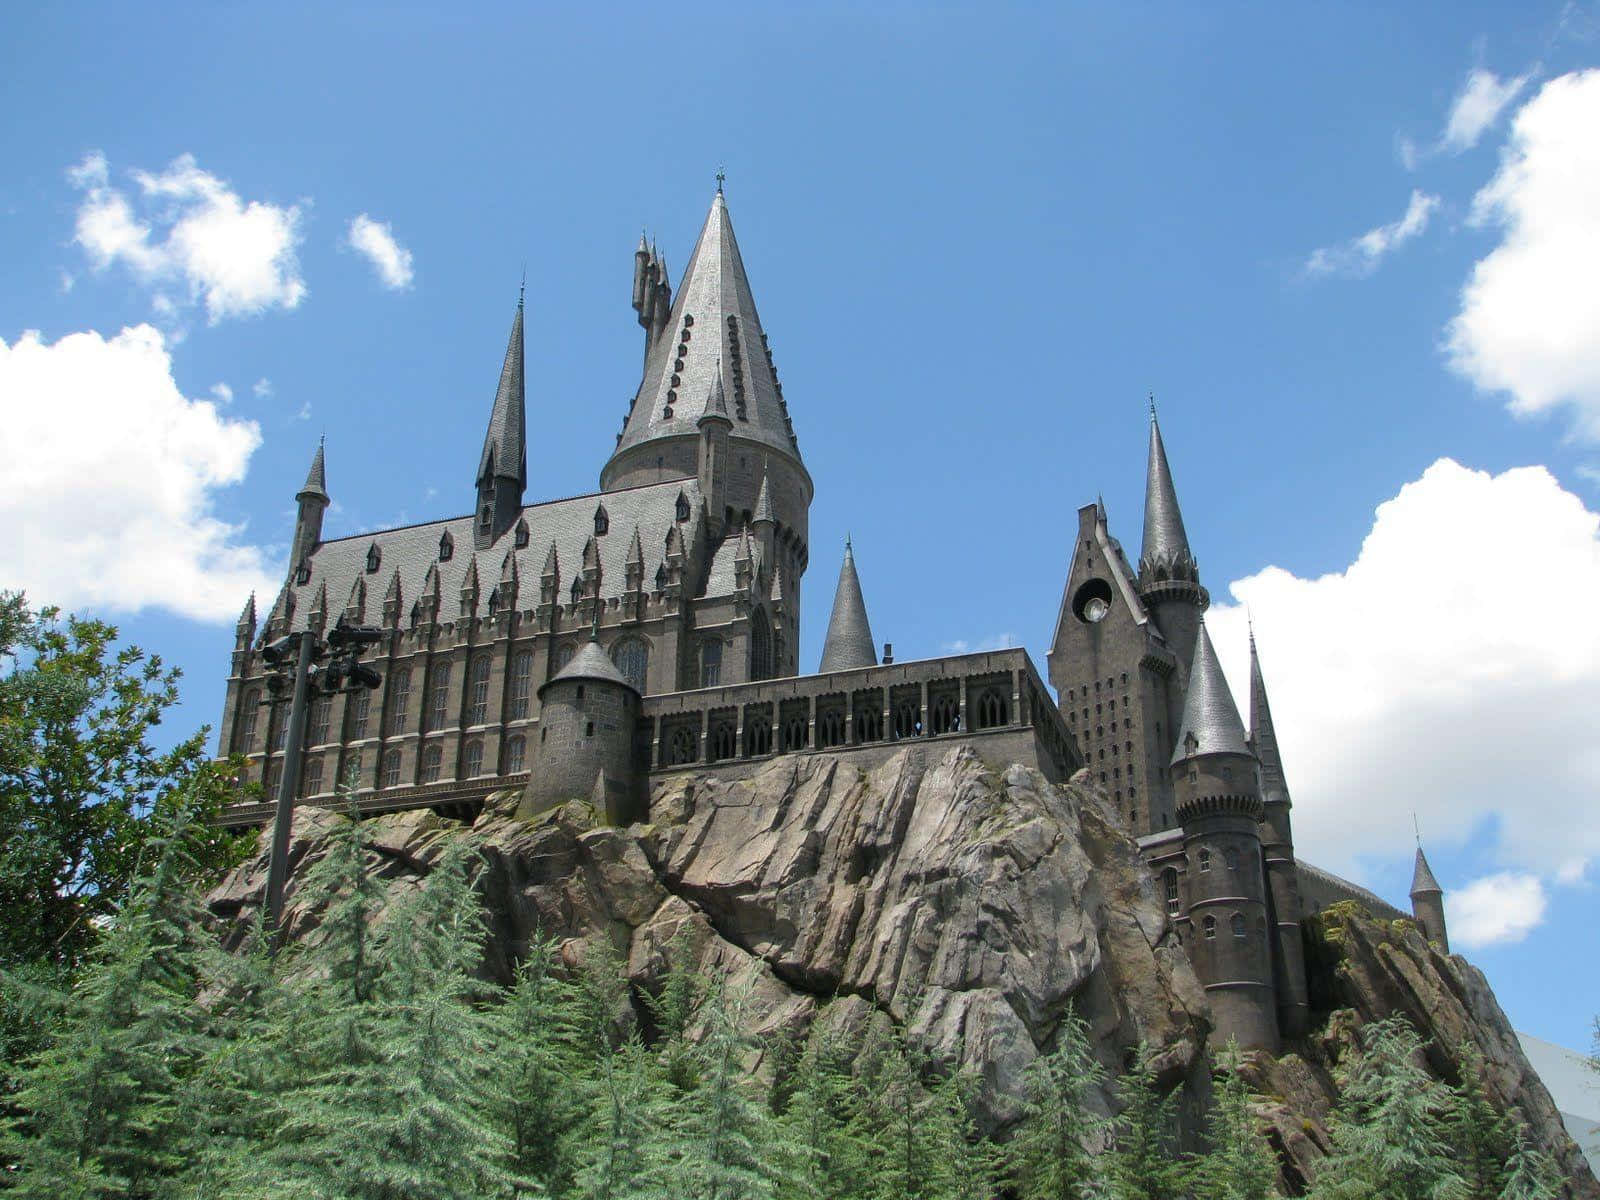 Unlock the Magic – Welcome to Hogwarts School of Witchcraft and Wizardry